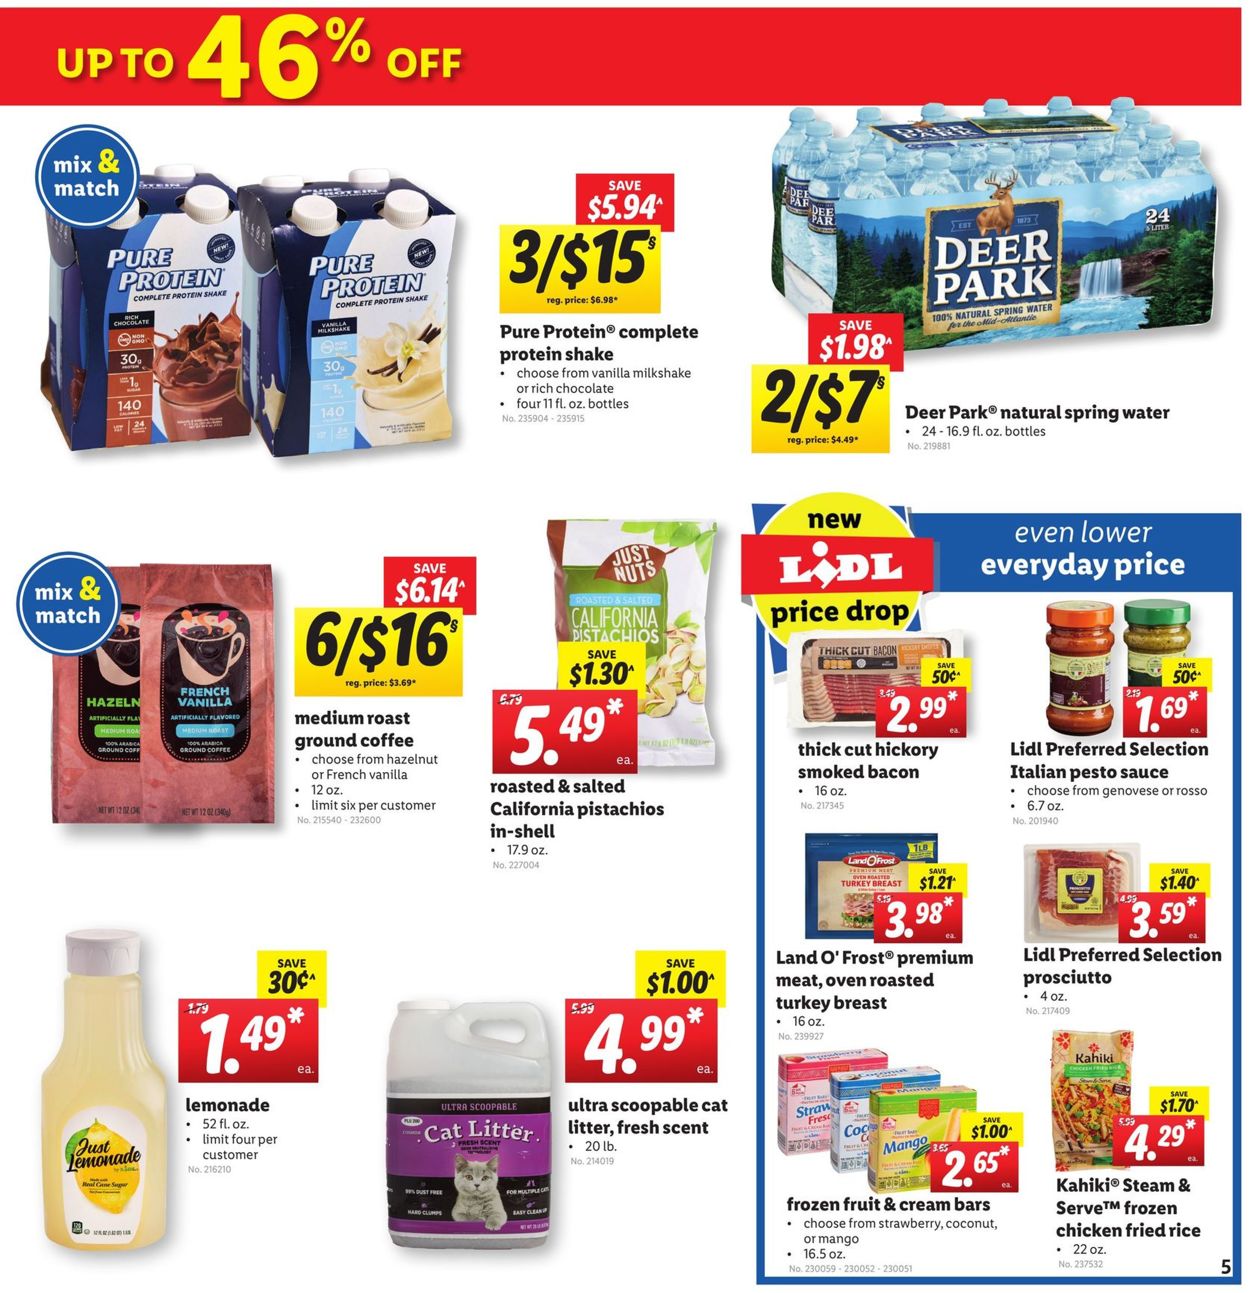 Catalogue Lidl from 11/04/2020